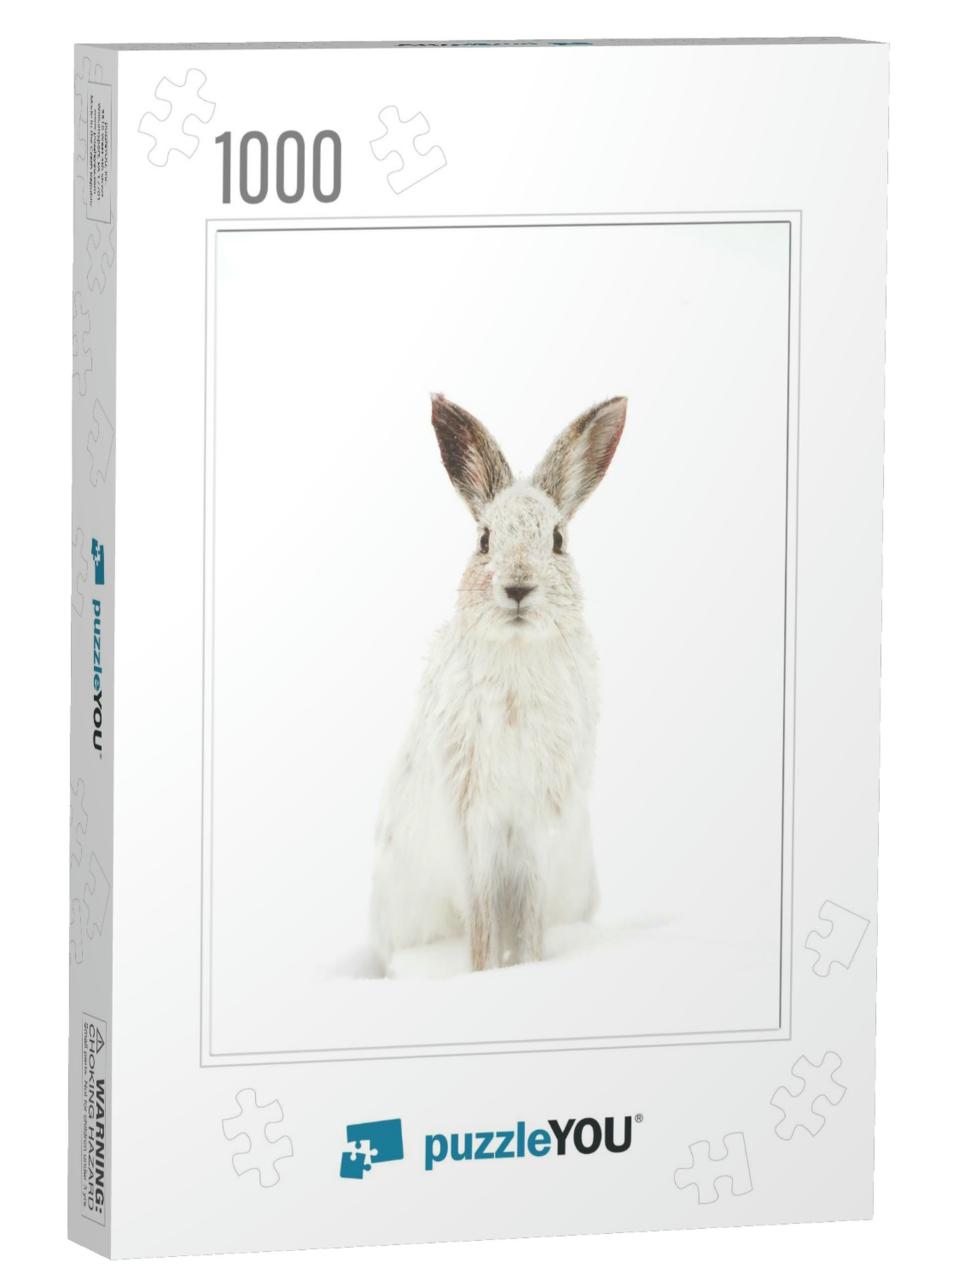 White Snowshoe Hare or Varying Hare Isolated on White Bac... Jigsaw Puzzle with 1000 pieces